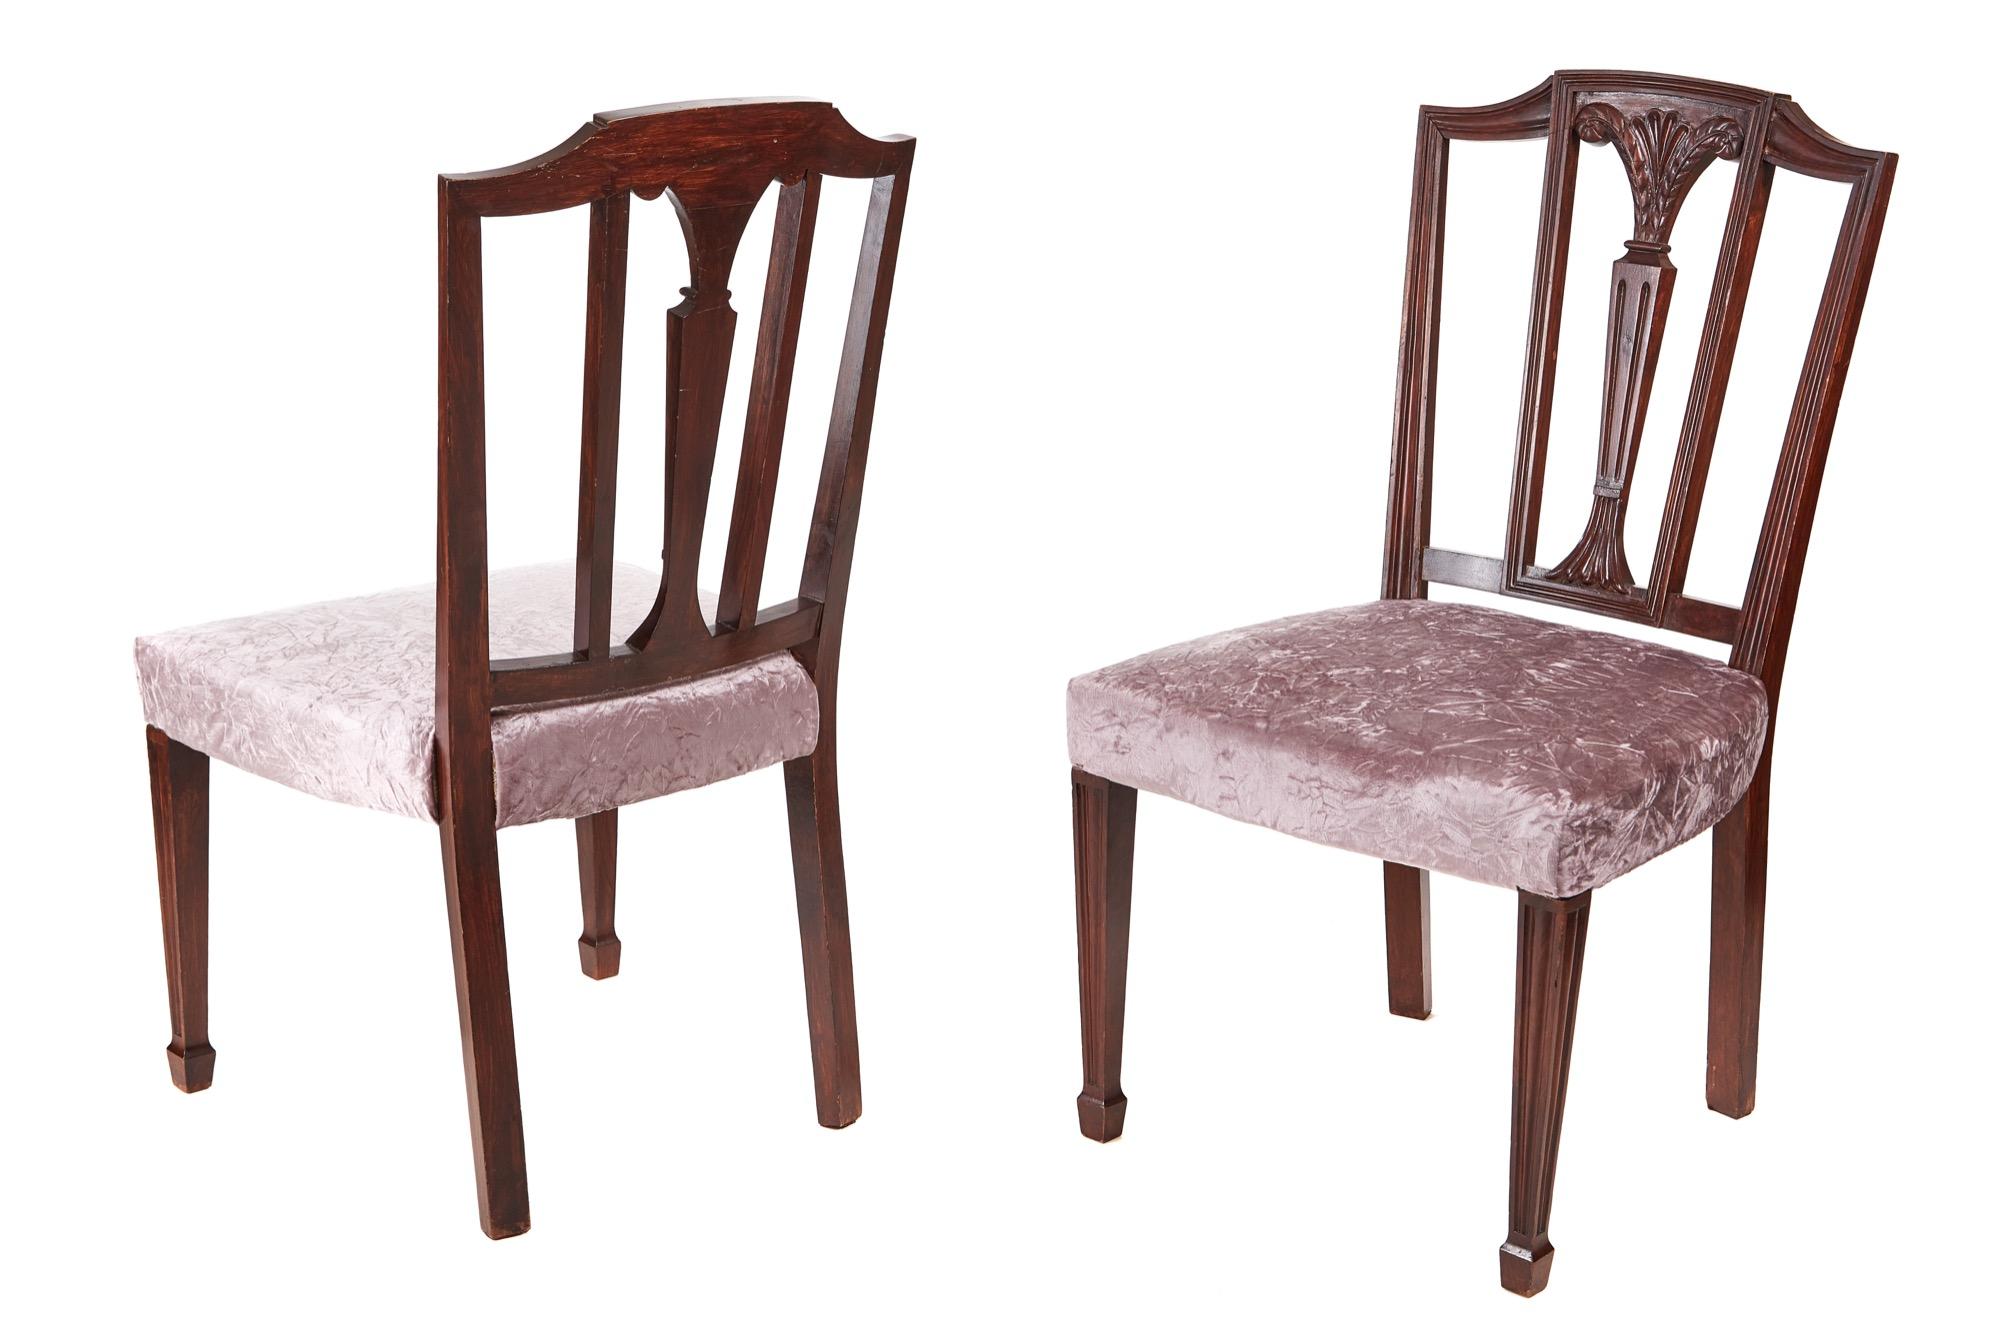 These are a pair of 19th century antique mahogany Hepplewhite style side chairs with shaped top rail and a carved and reeded centre splat. They have had newly reupholstered seats. They stand on reeded tapered front legs with out-swept back